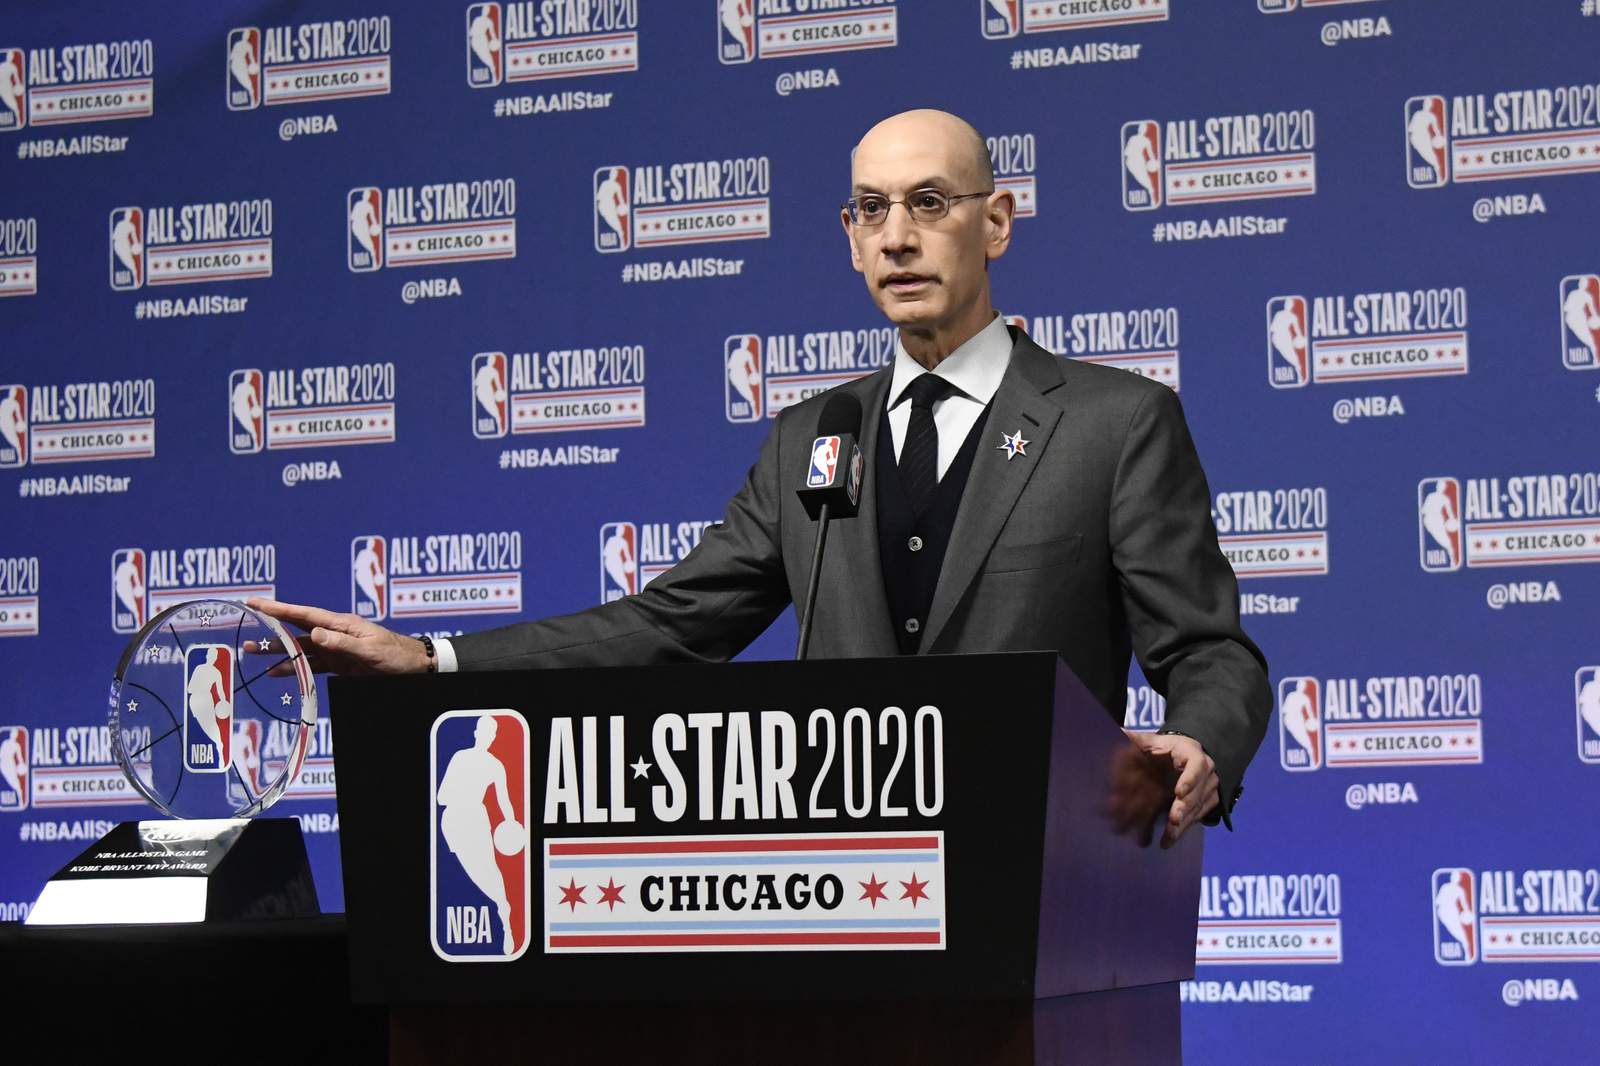 NBA to reopen facilities this week in states relaxing stay-at-home orders, according to report